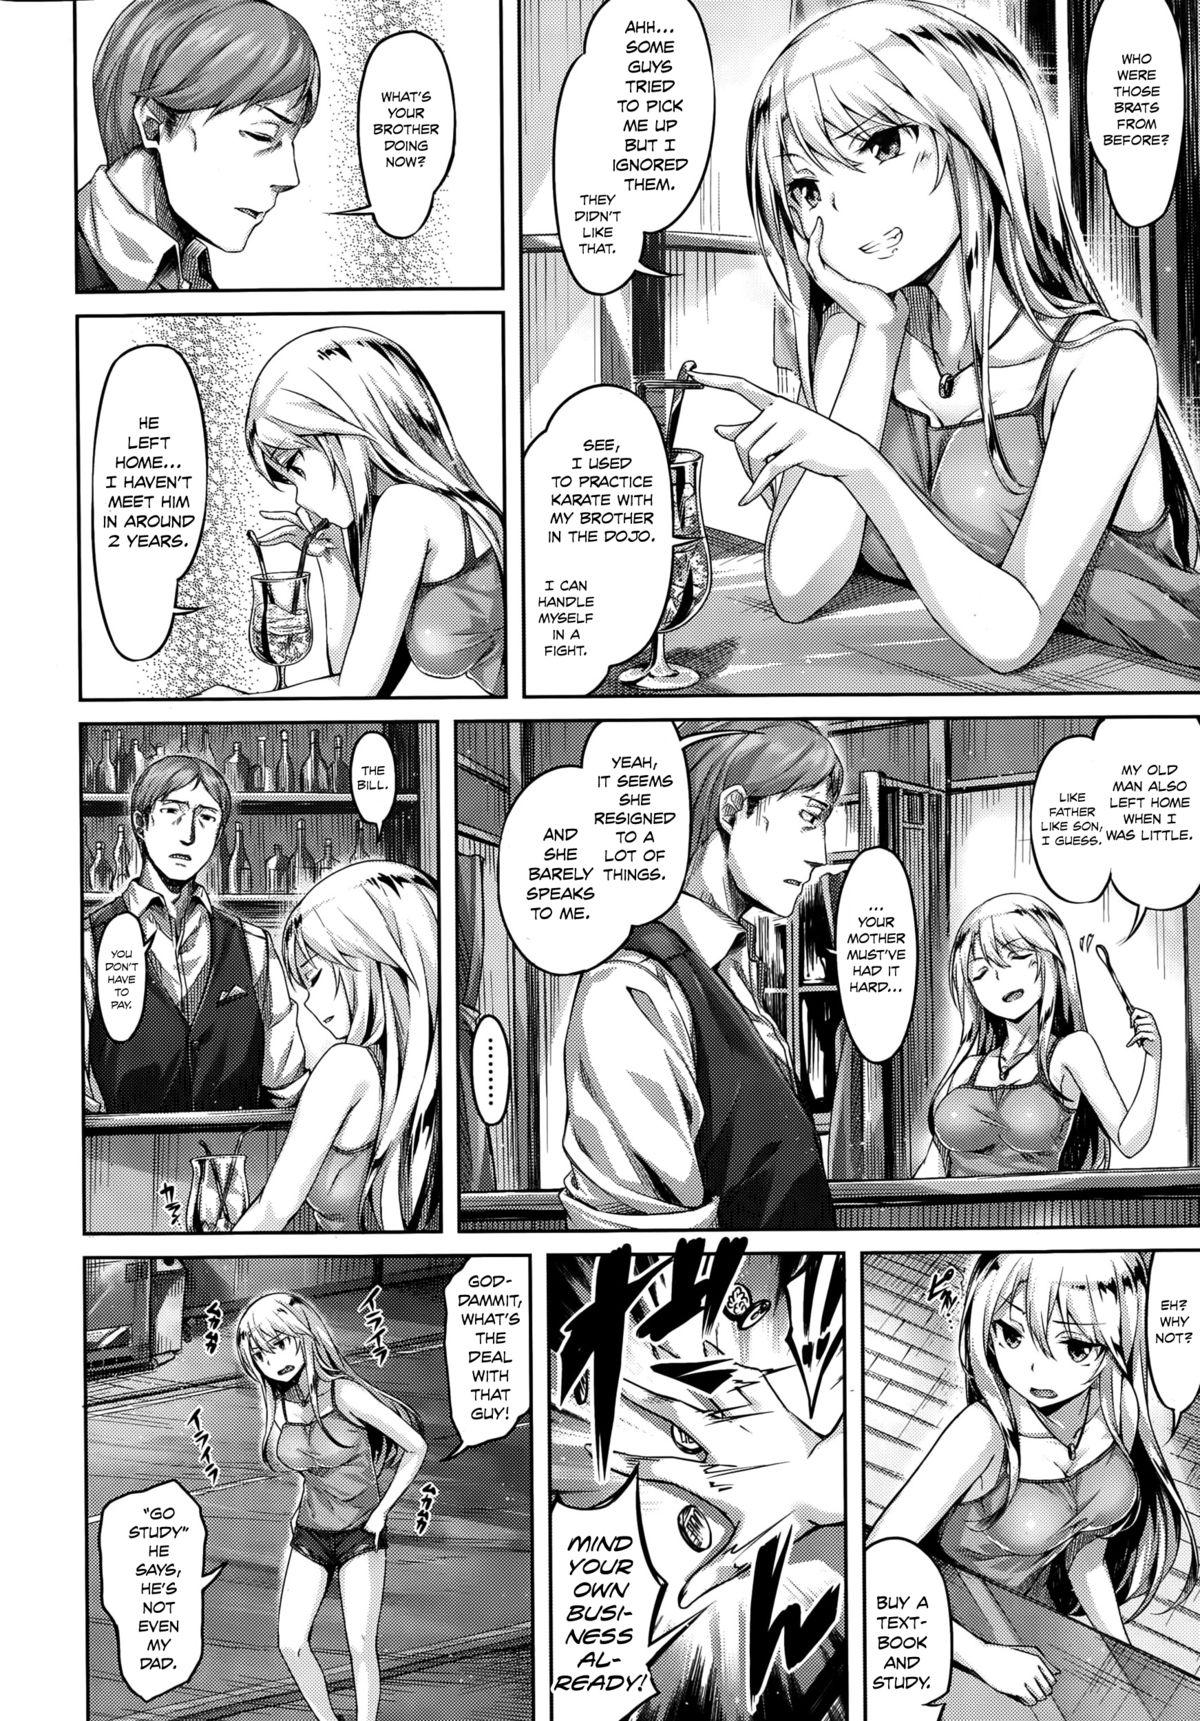 Desperate Akogare no Hito | My Loved One People Having Sex - Page 4